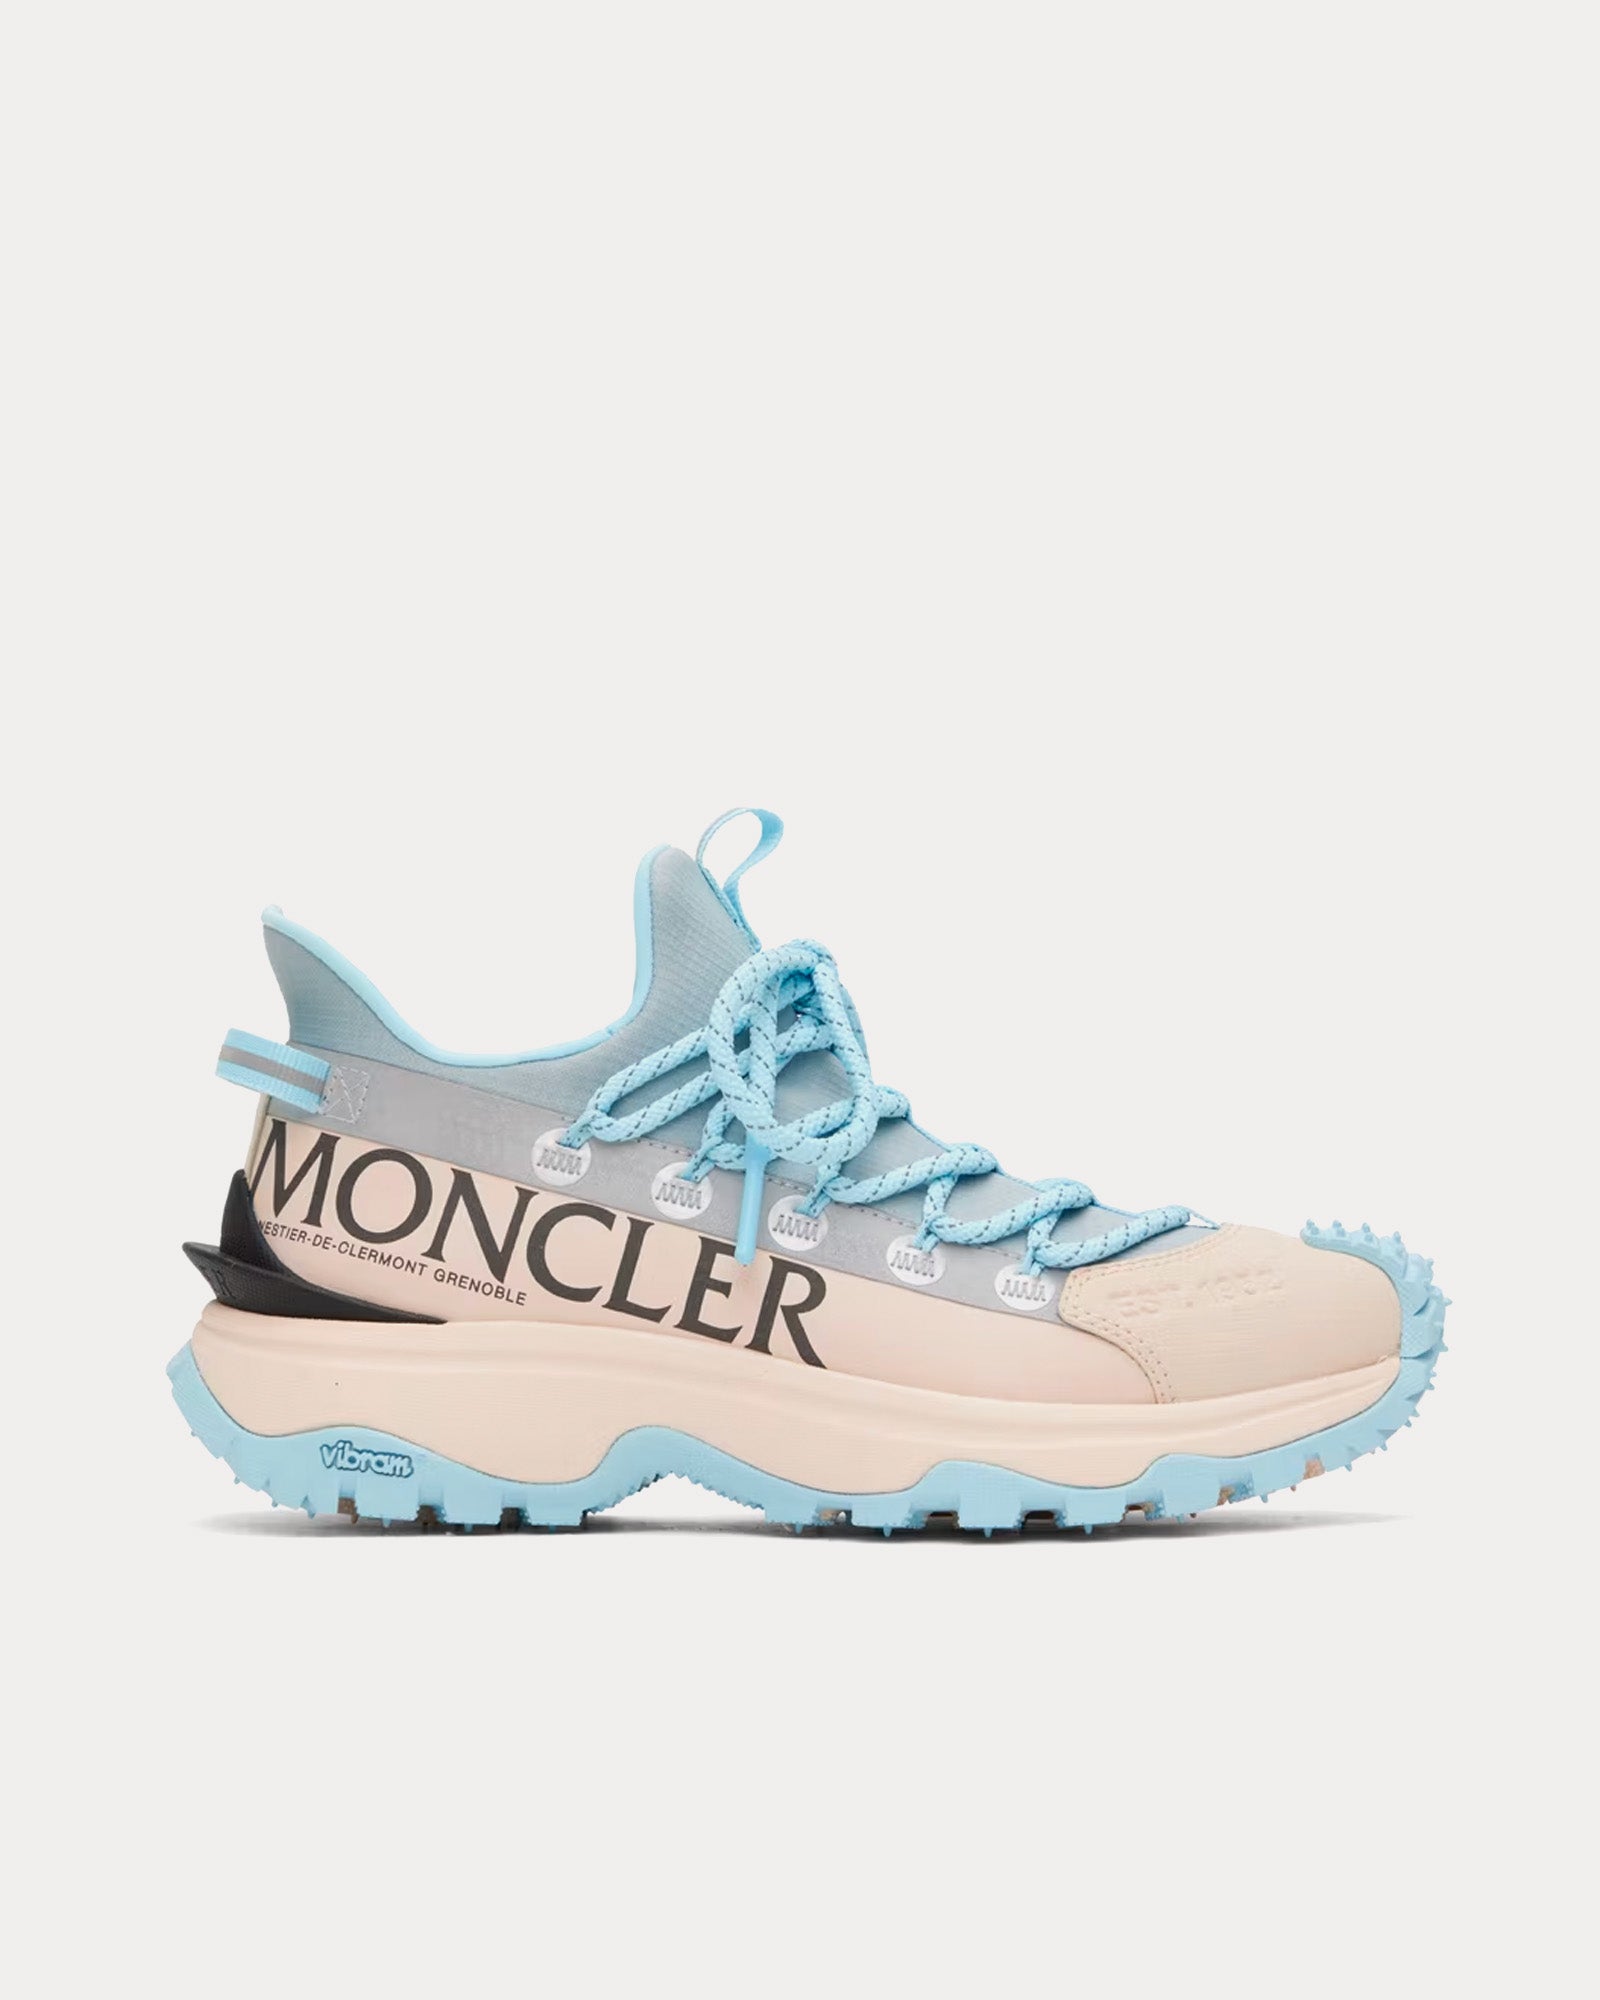 Moncler - Trailgrip Lite 2 White / Blue Low Top Sneakers